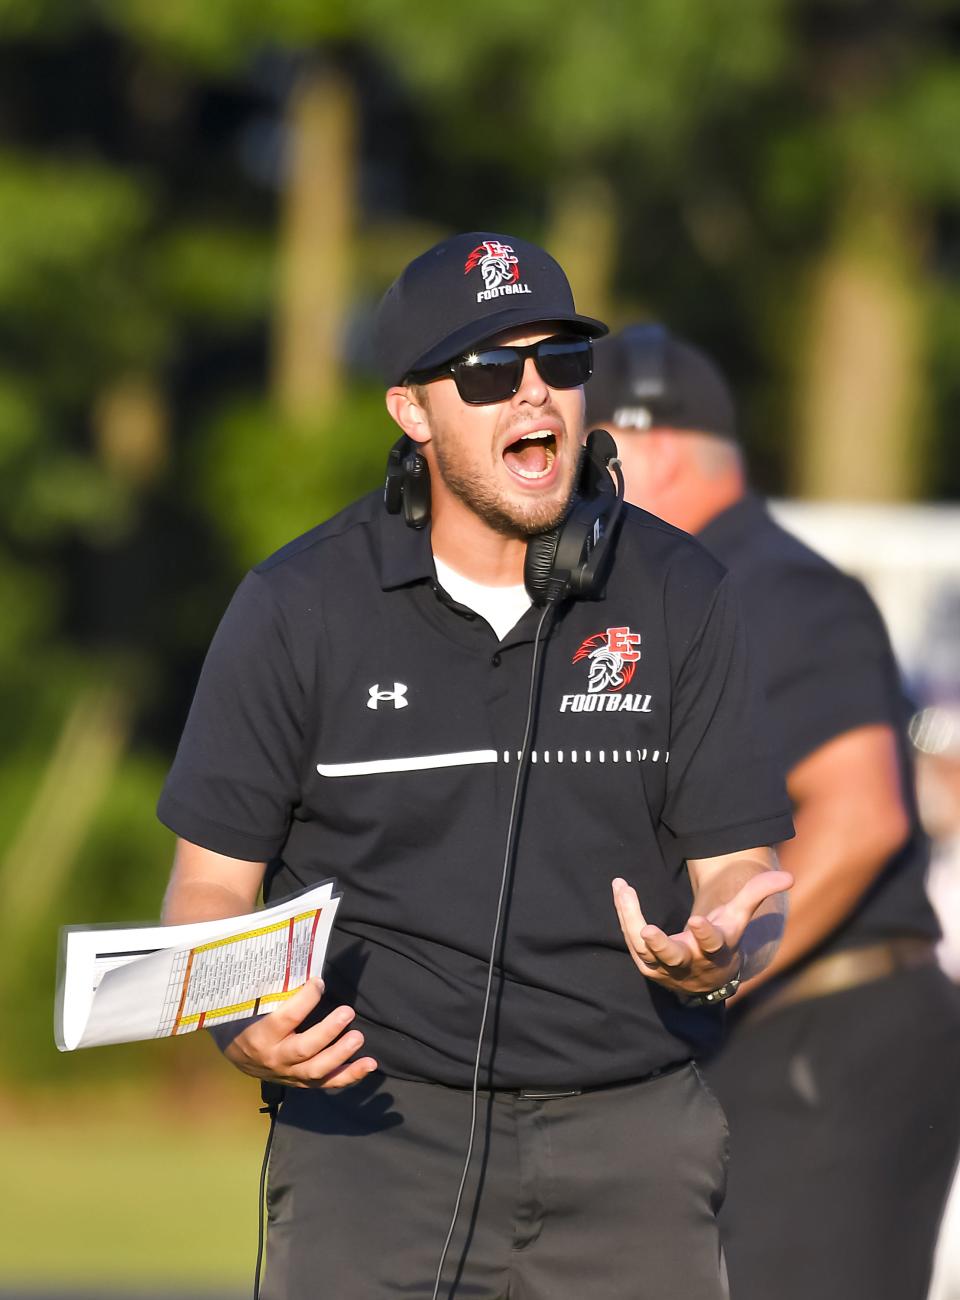 Trojan head coach Jake Meiners reacts during the Skyline Chili Crosstown Showdown against Lawrenceburg at East Central High School on Friday, Aug. 19, 2022.